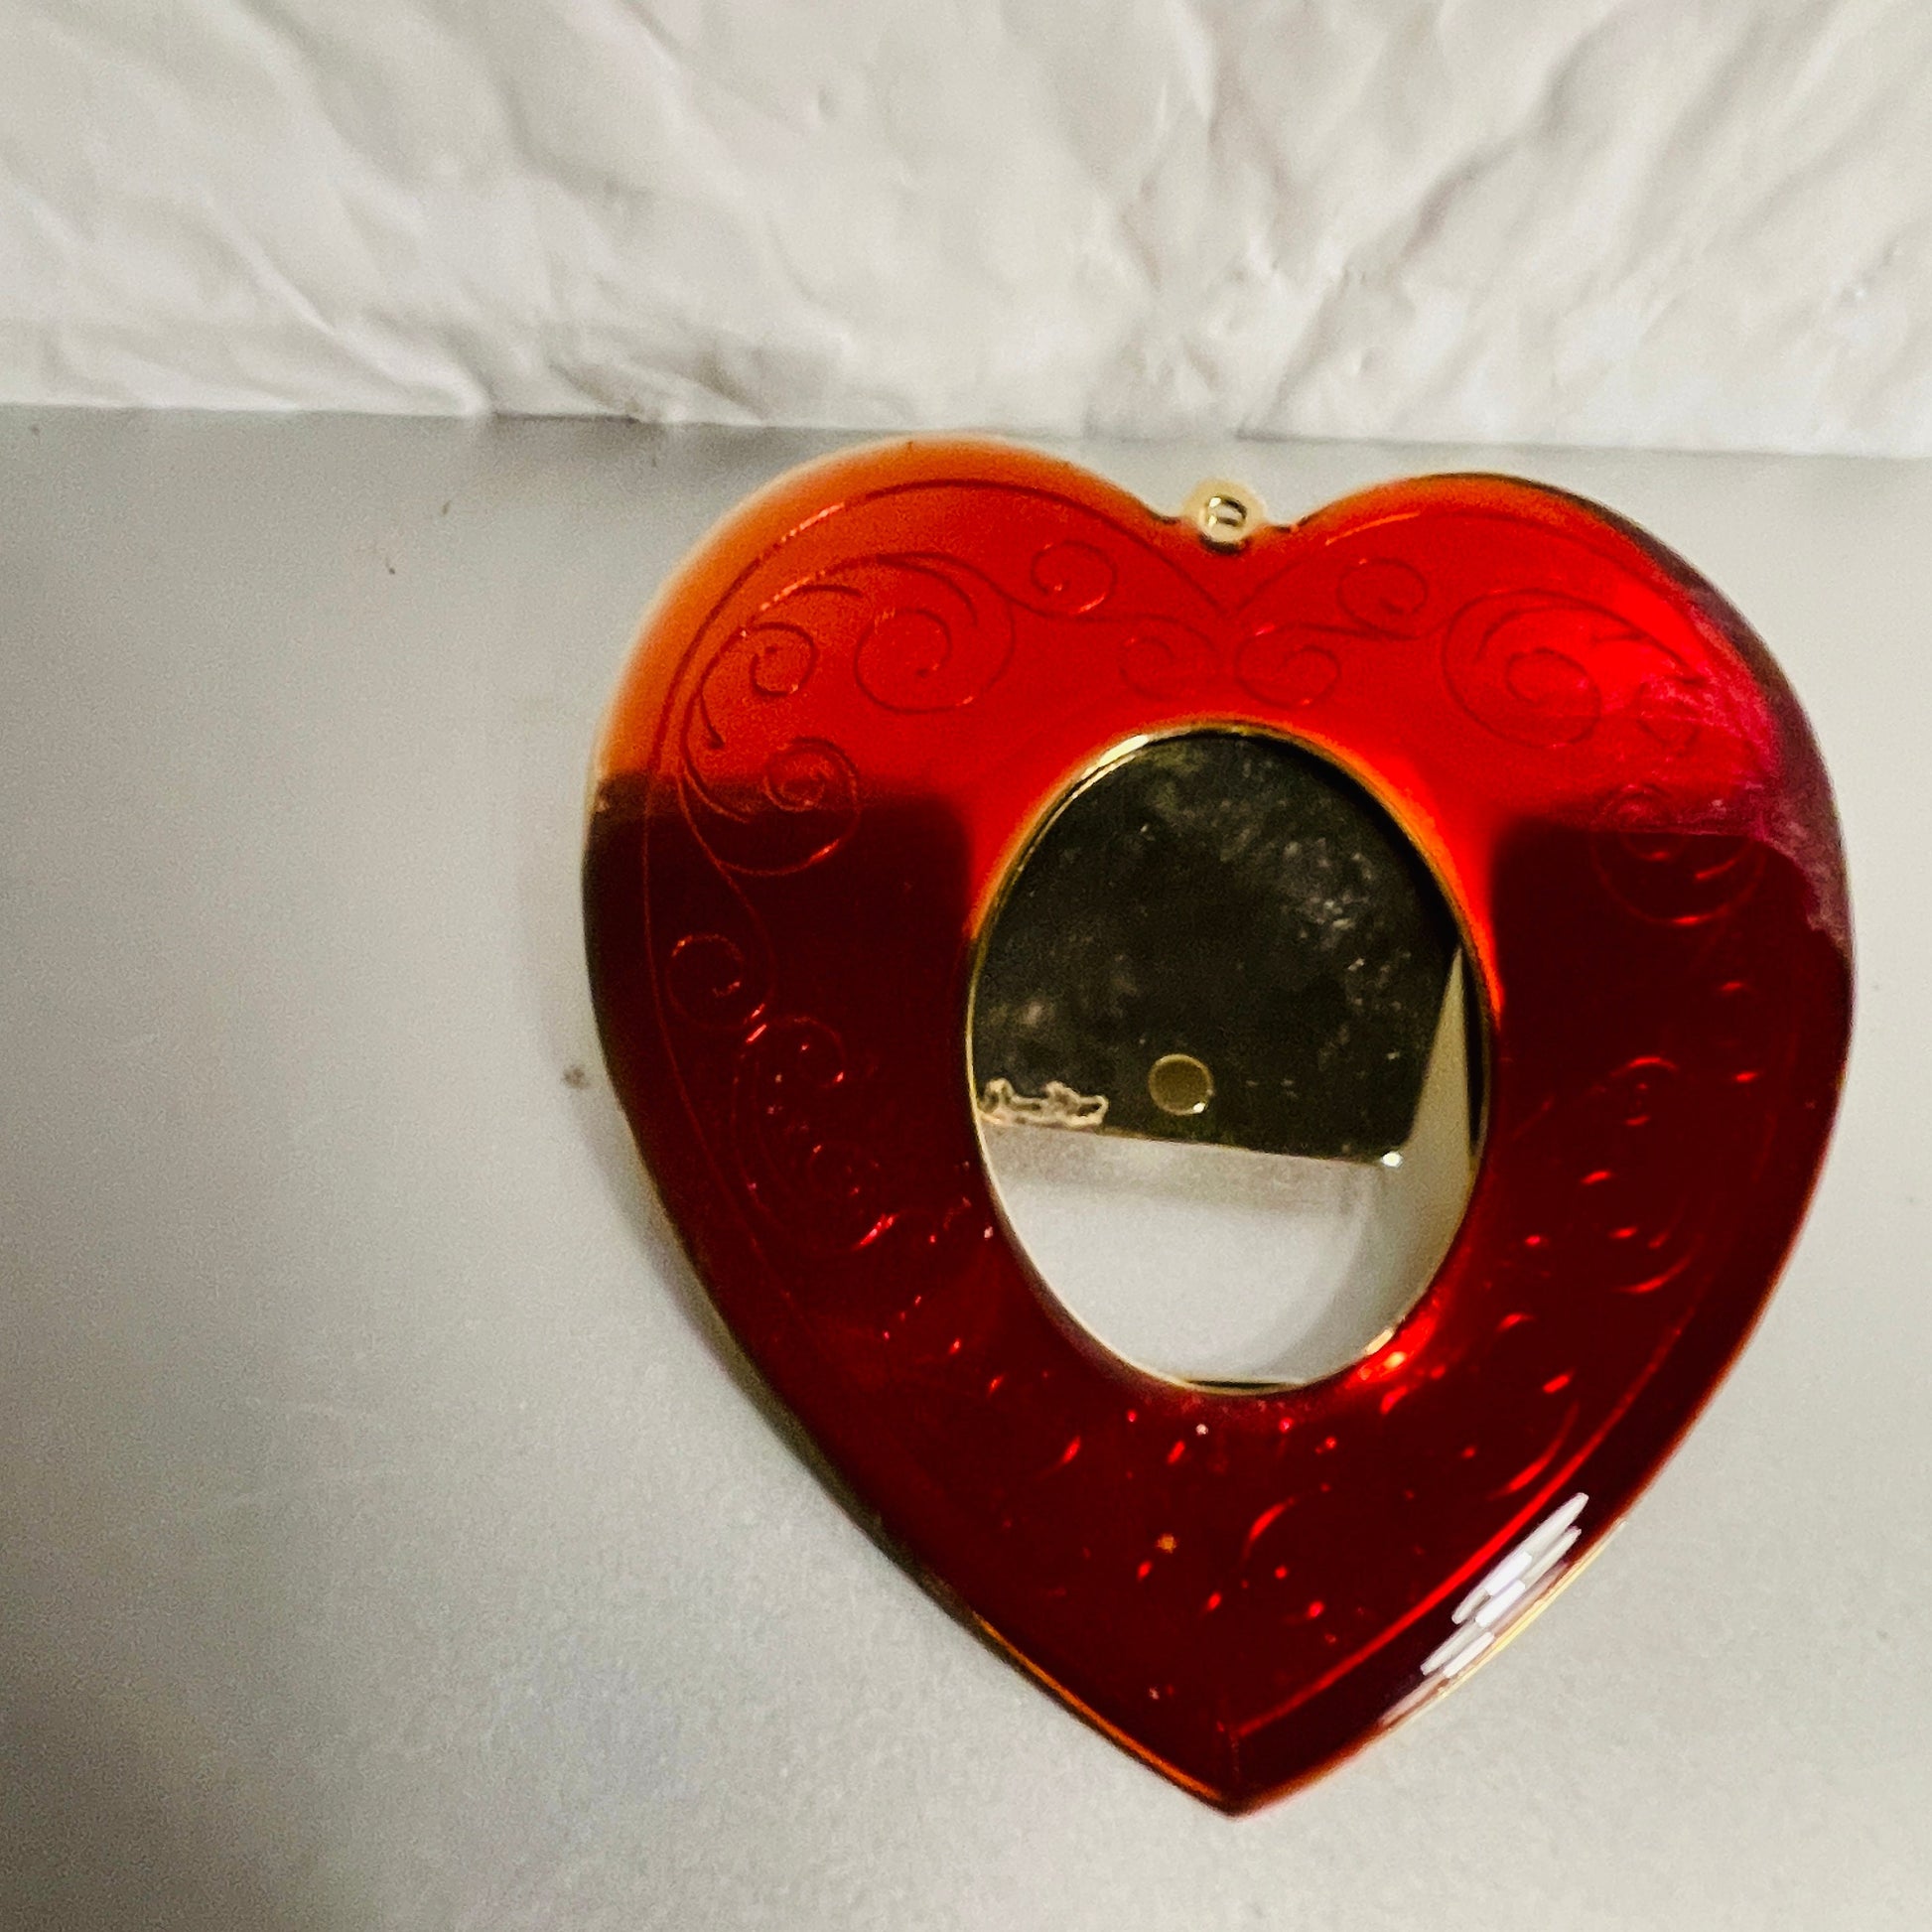 Teddy Bear Or Red Heart, Choice of Gold-Tone Metal Mini Picture Frame Ornaments with Stand